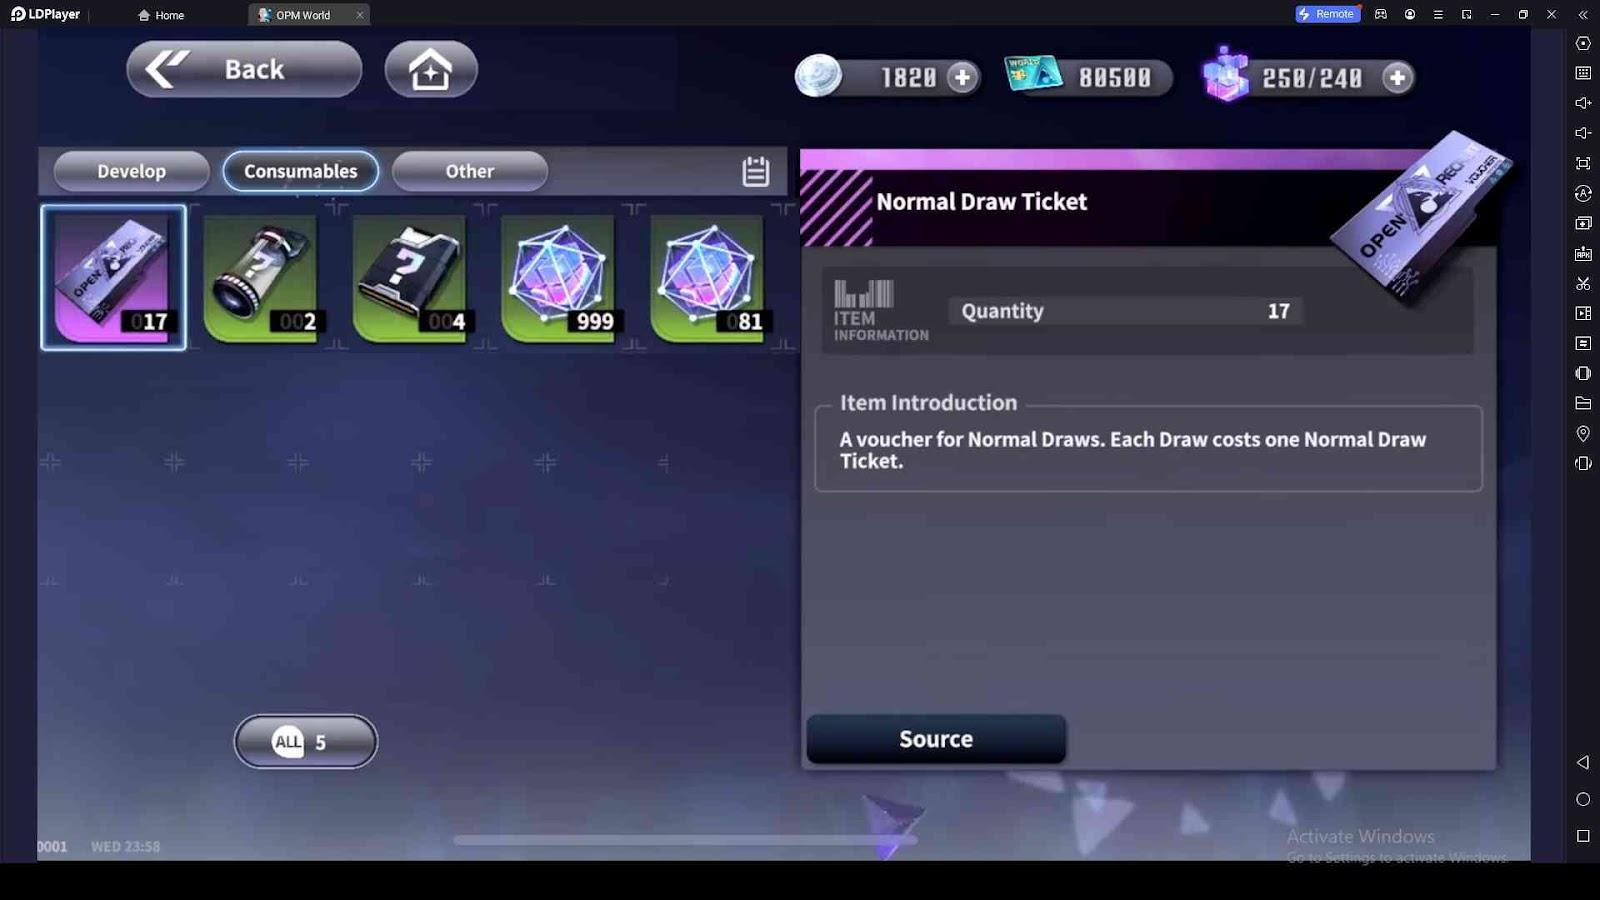 Normal Draw Tickets